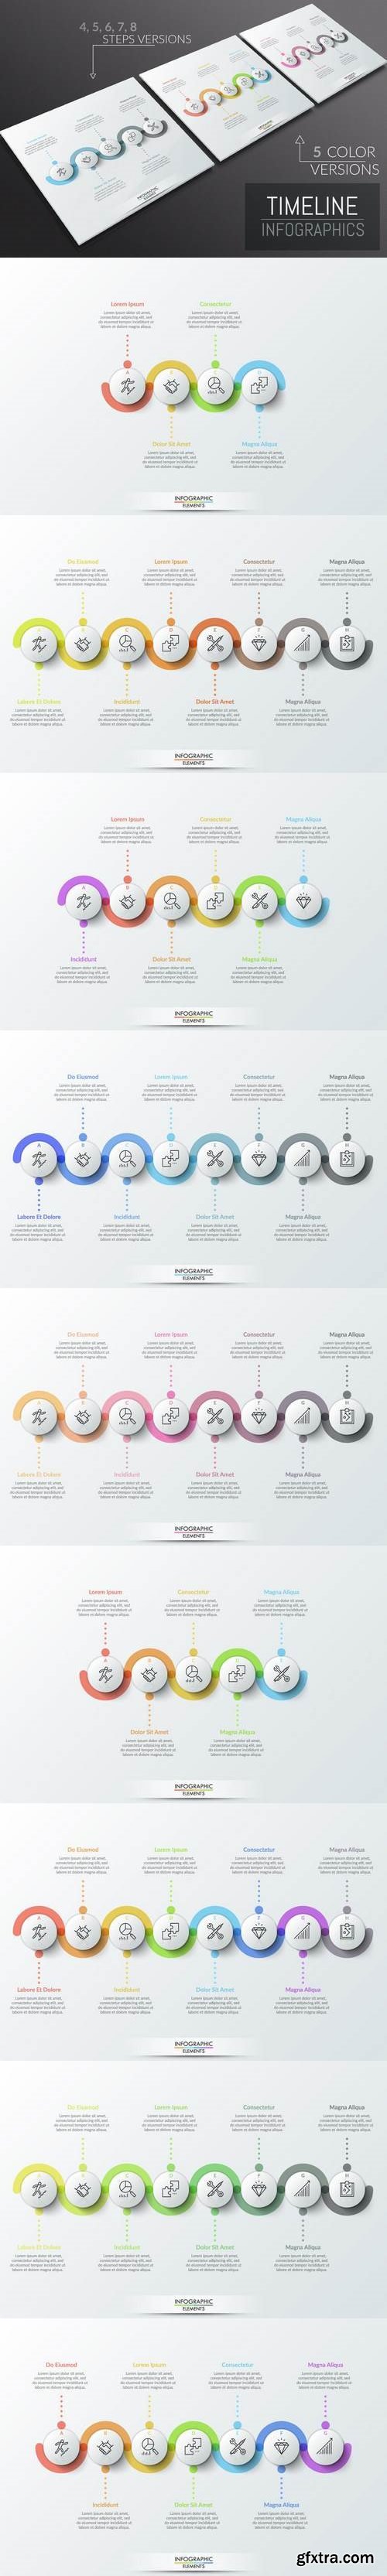 25 Infographic Timelines